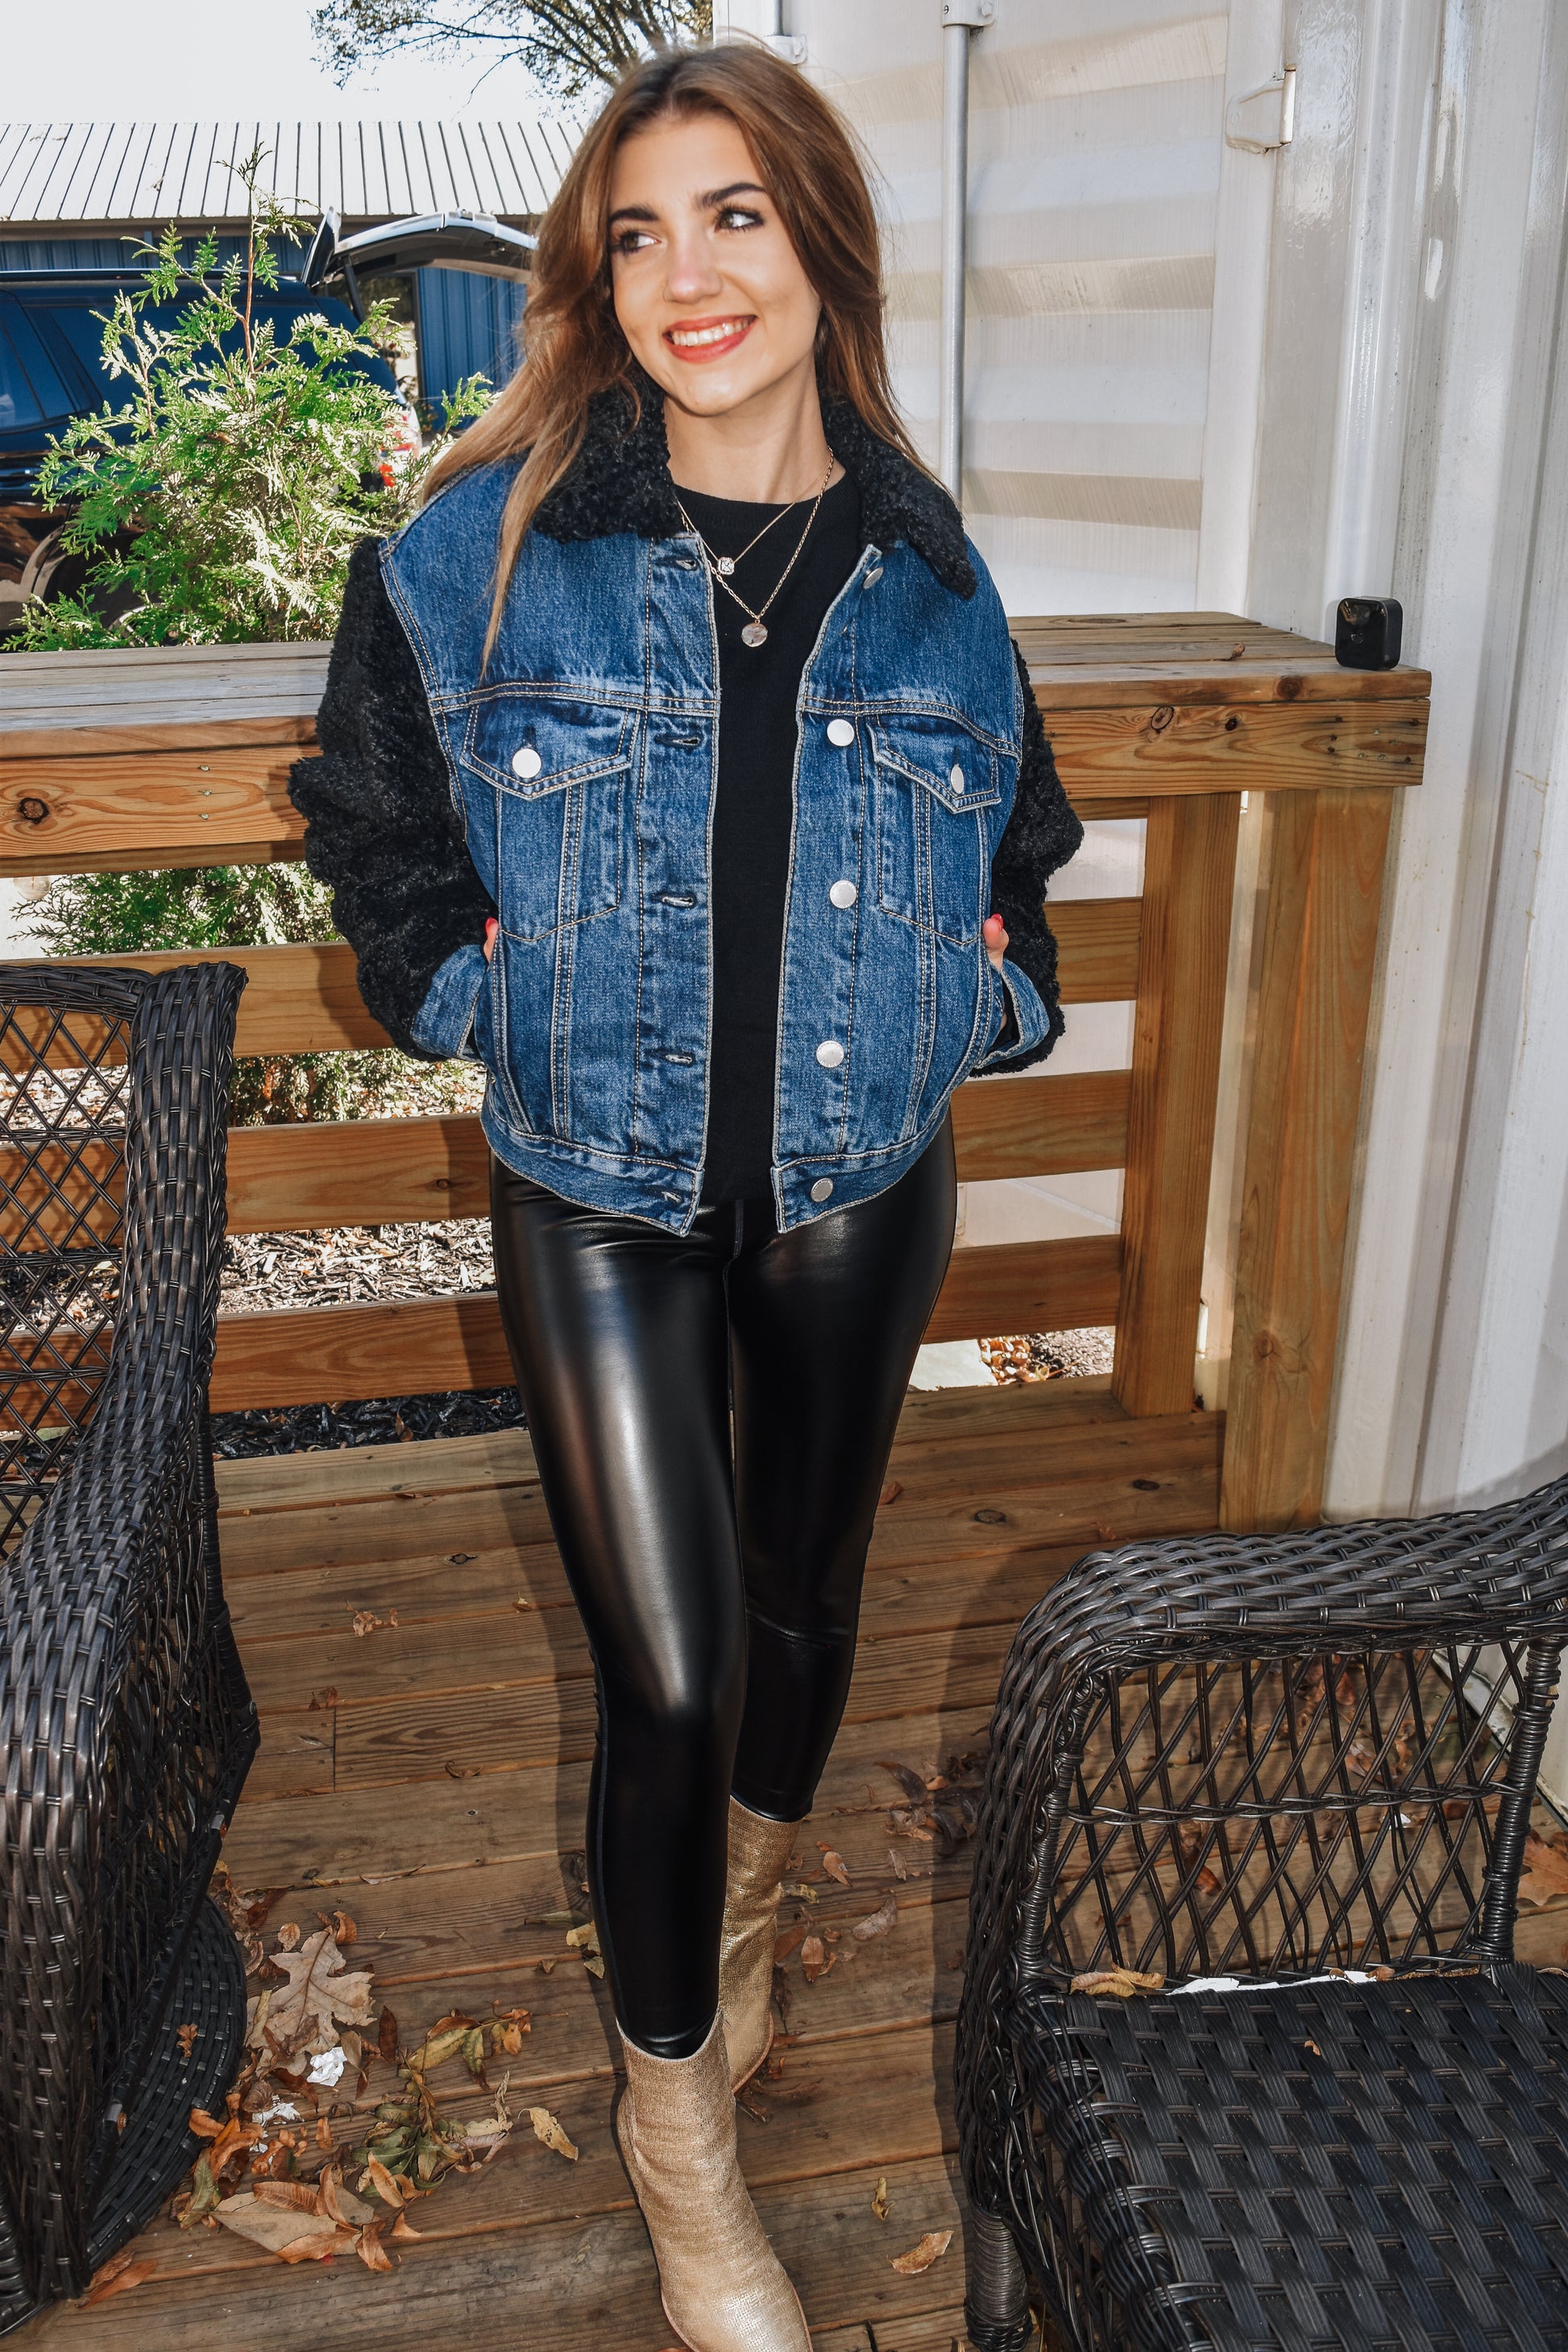 Outfit Ideas for Faux Leather Leggings - Pinteresting Plans  Outfits with  leggings, Faux leather leggings outfit, Black leather leggings outfit